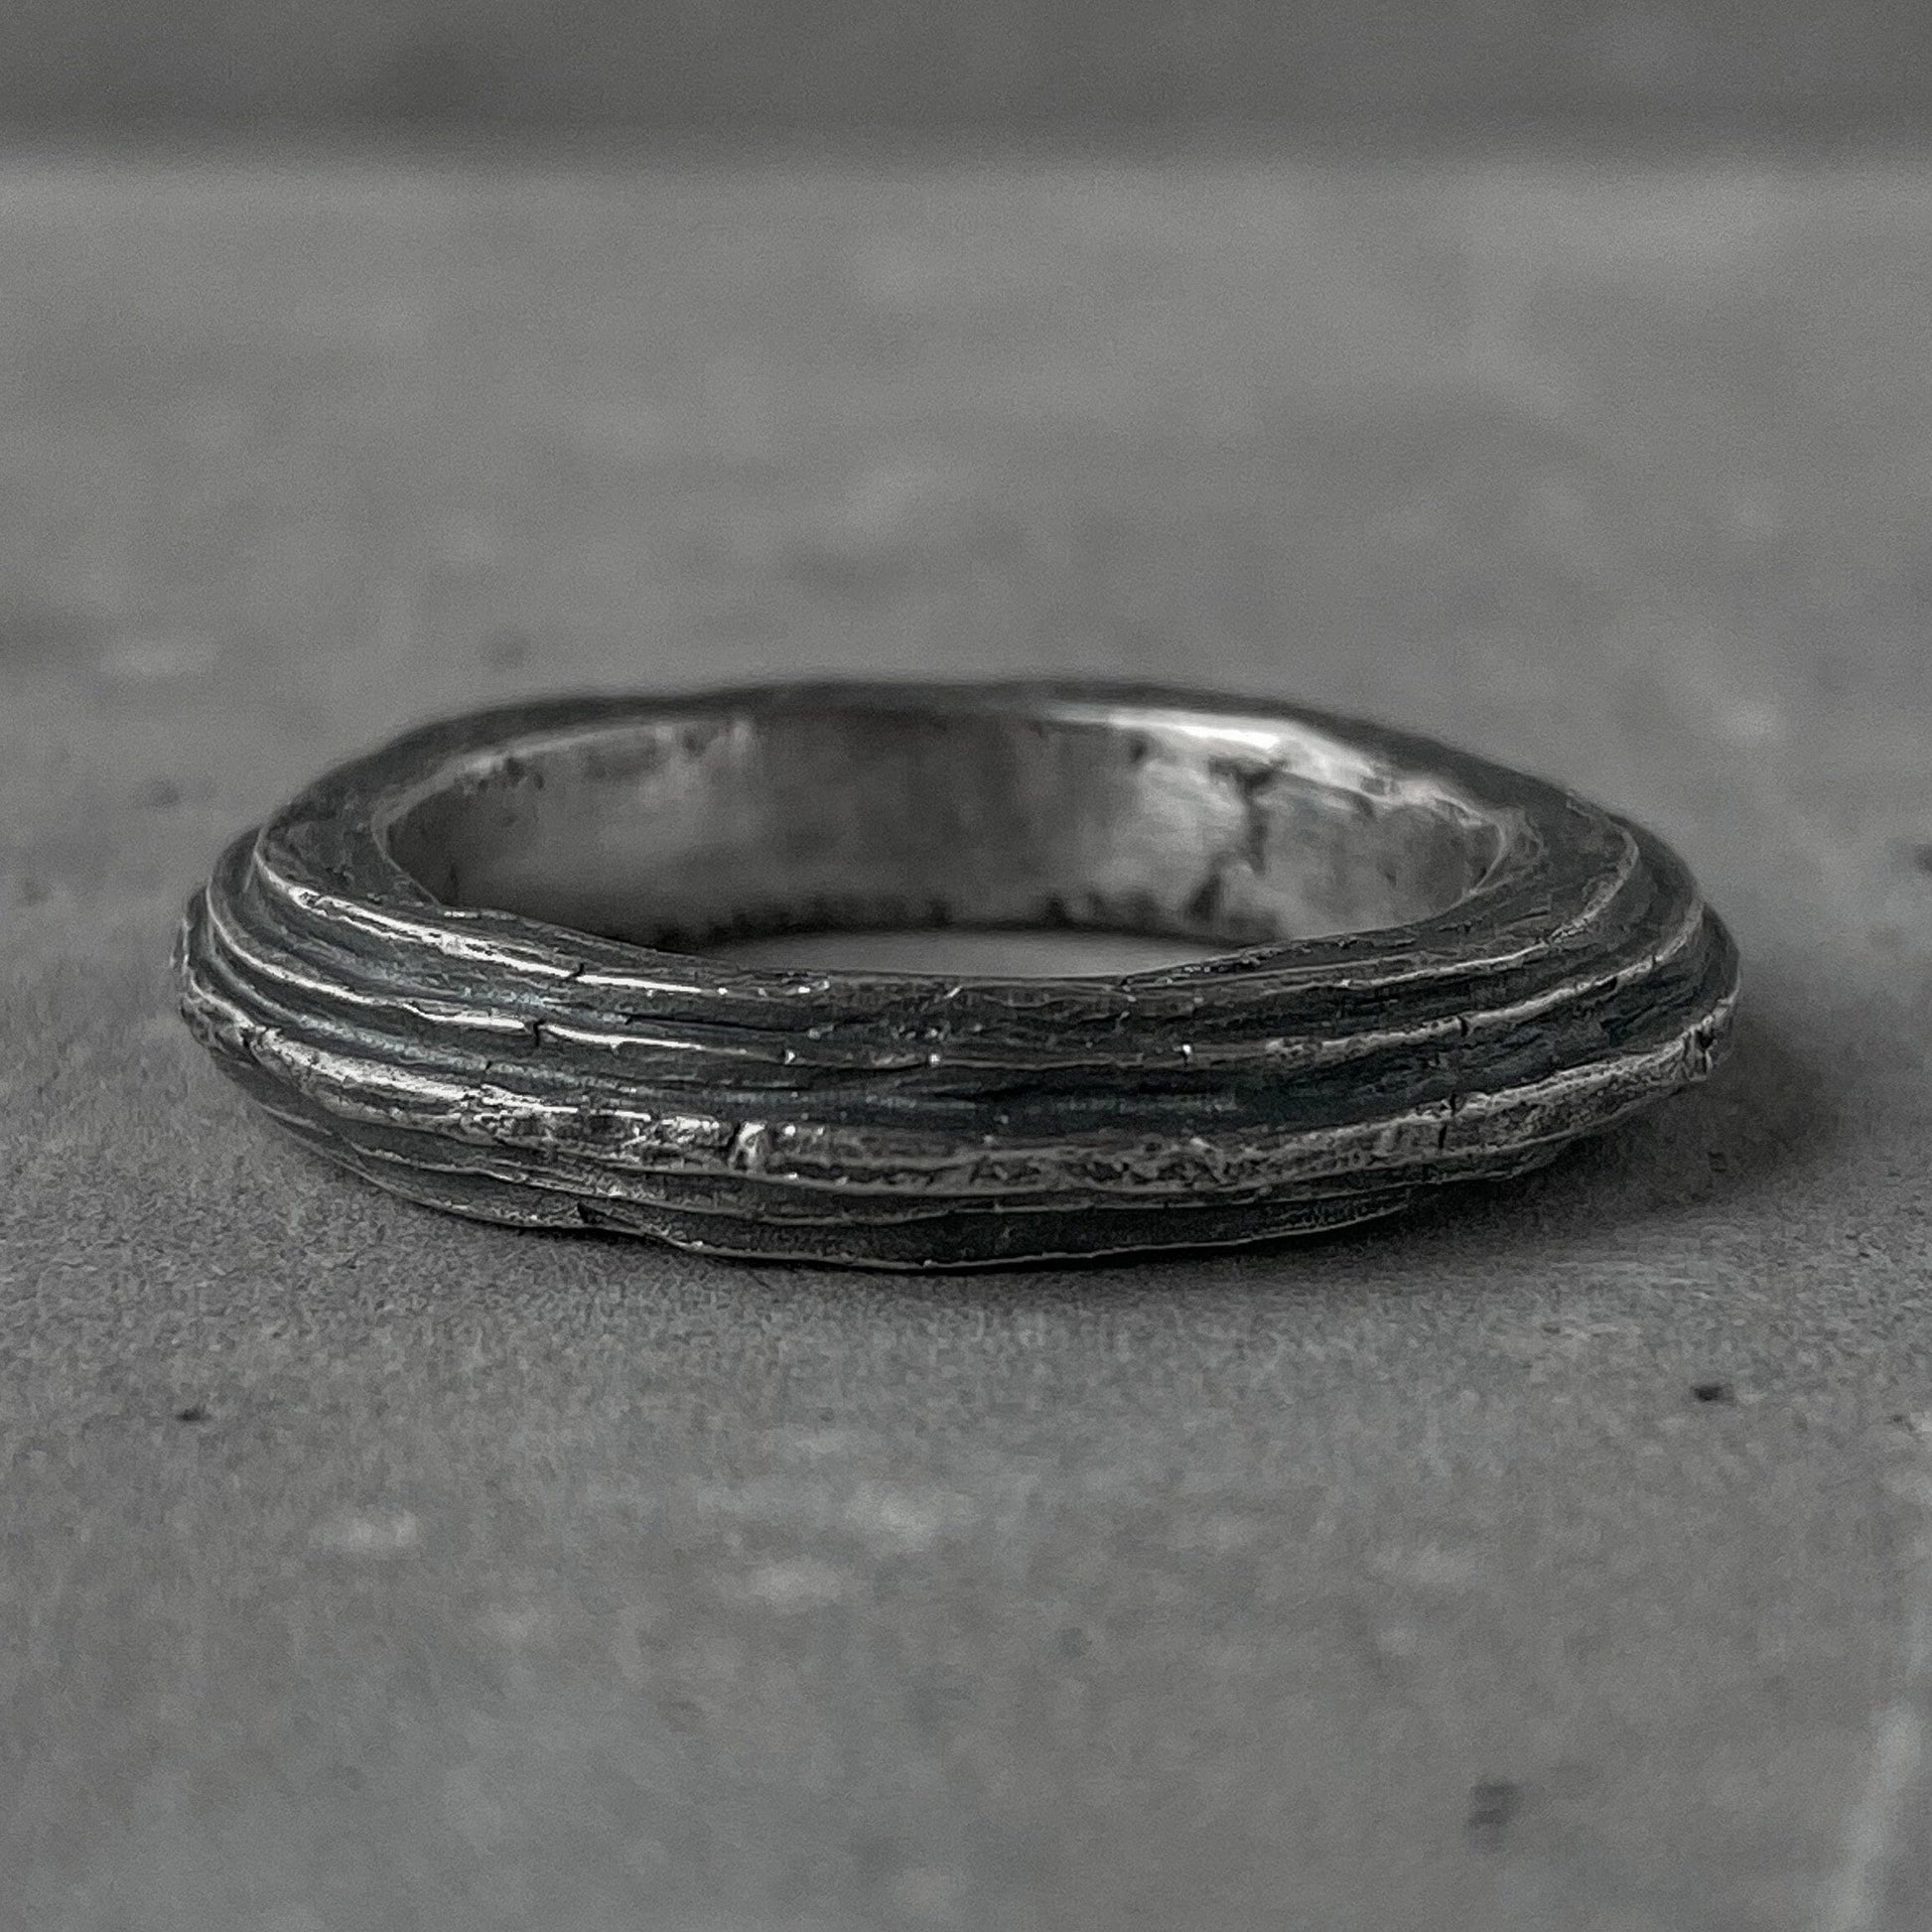 Orbit ring- thin ring with unusual handcrafted texture Band rings Project50g 